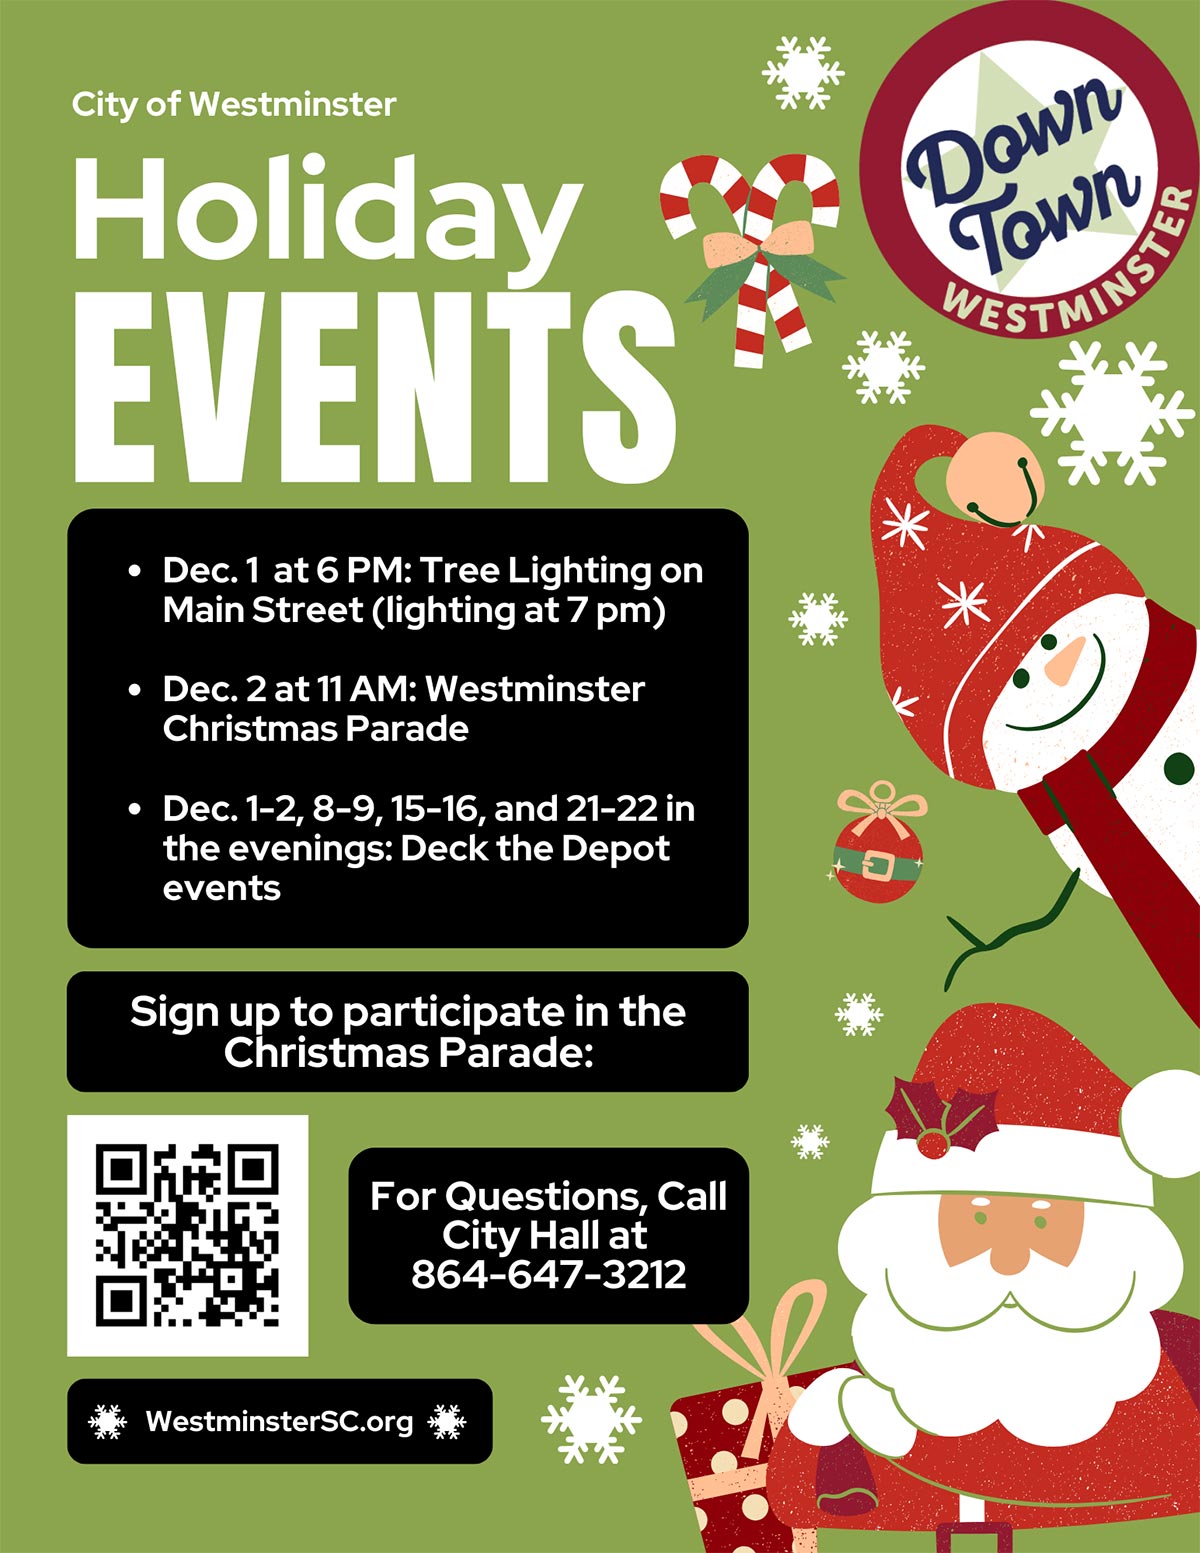 Holiday Events schedule